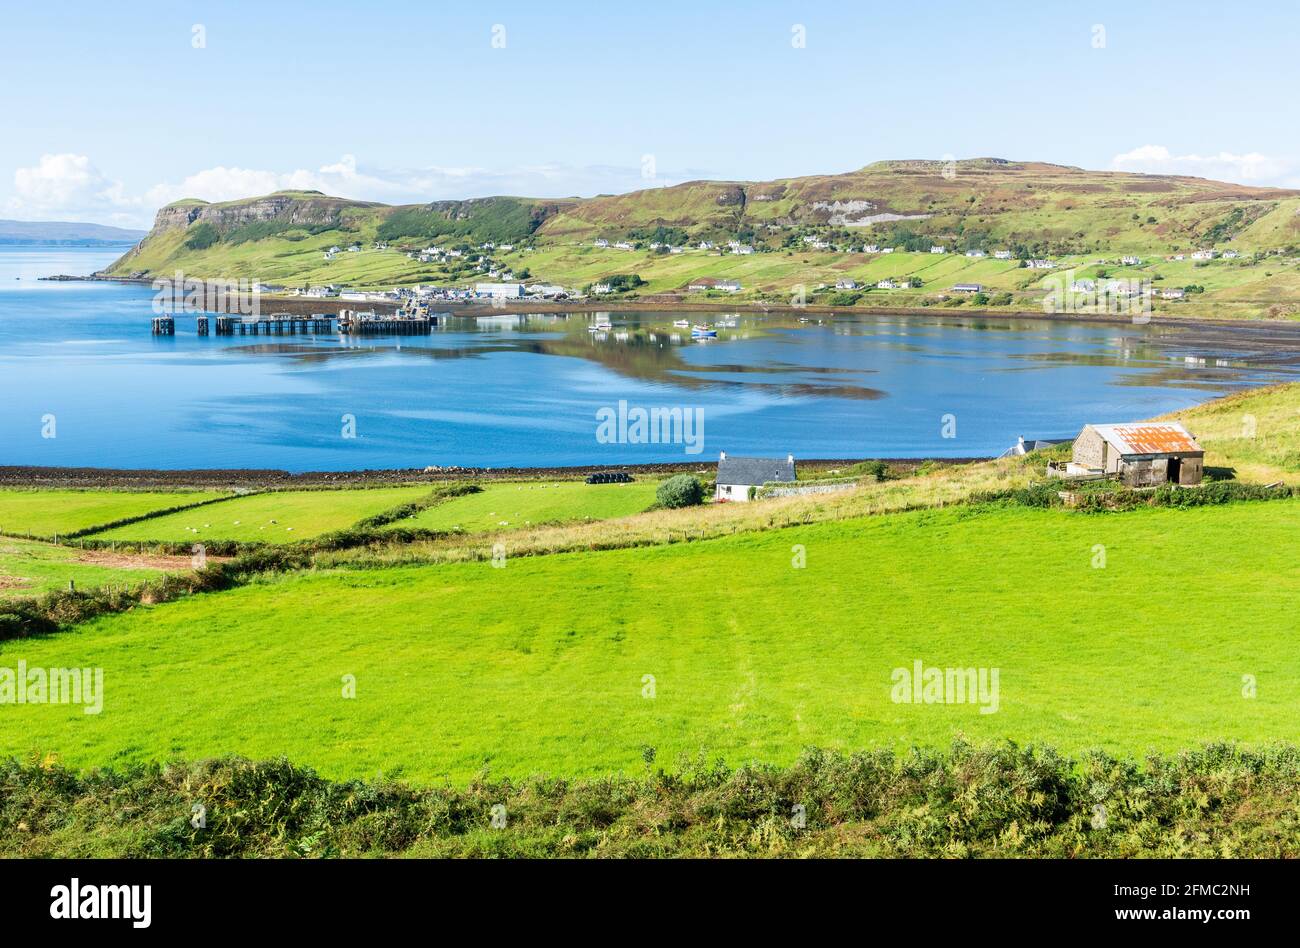 View over Uig village and bay in the Isle of Skye in Scotland. Stock Photo